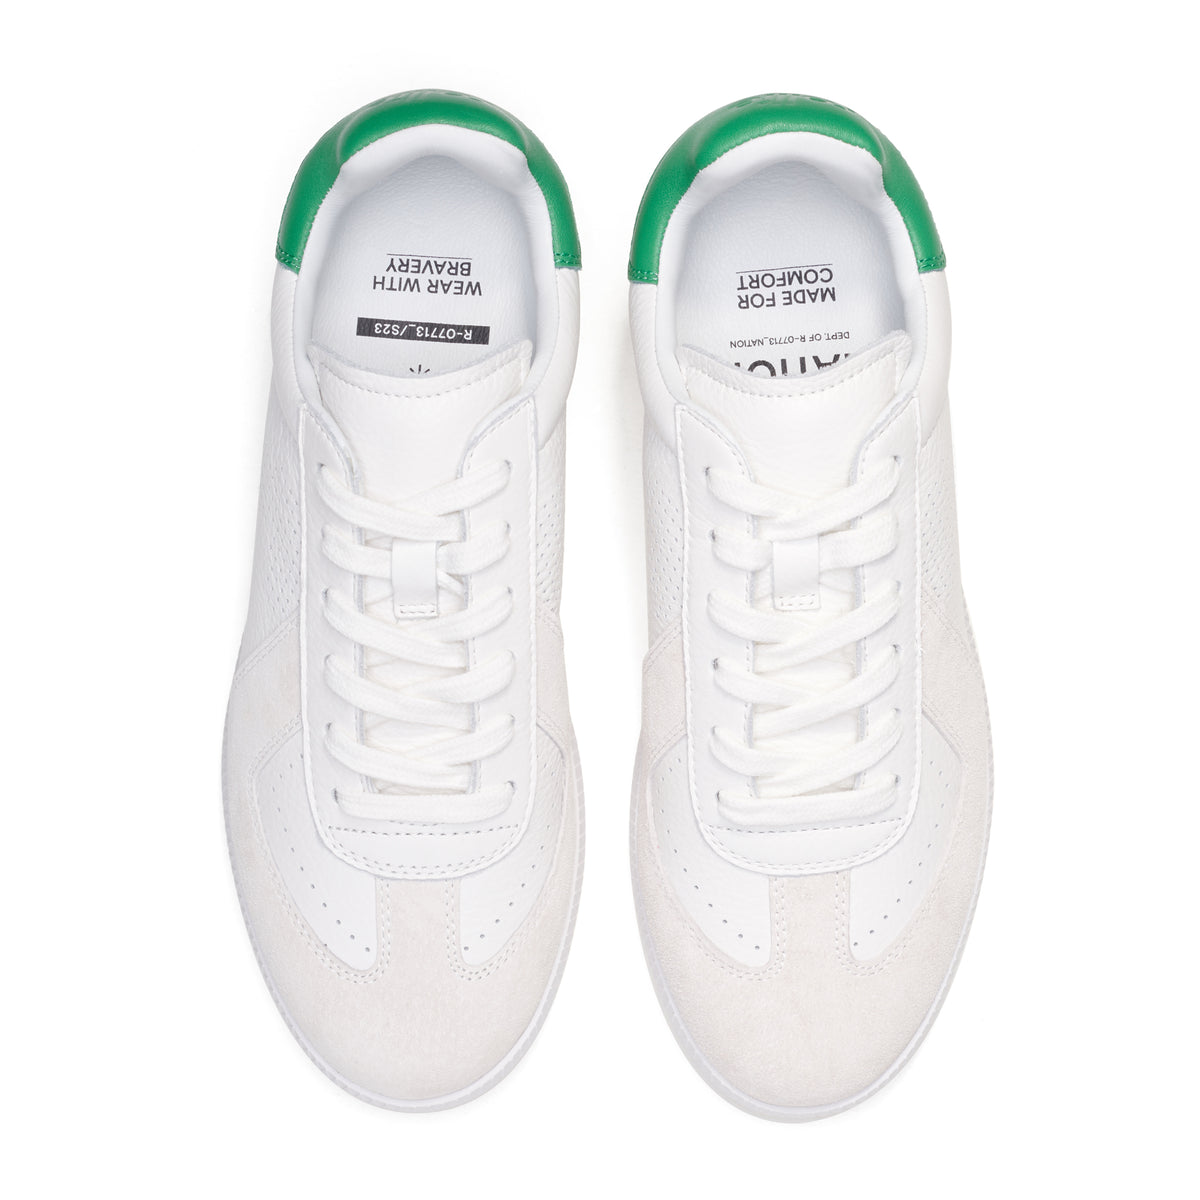 Pace White/Green